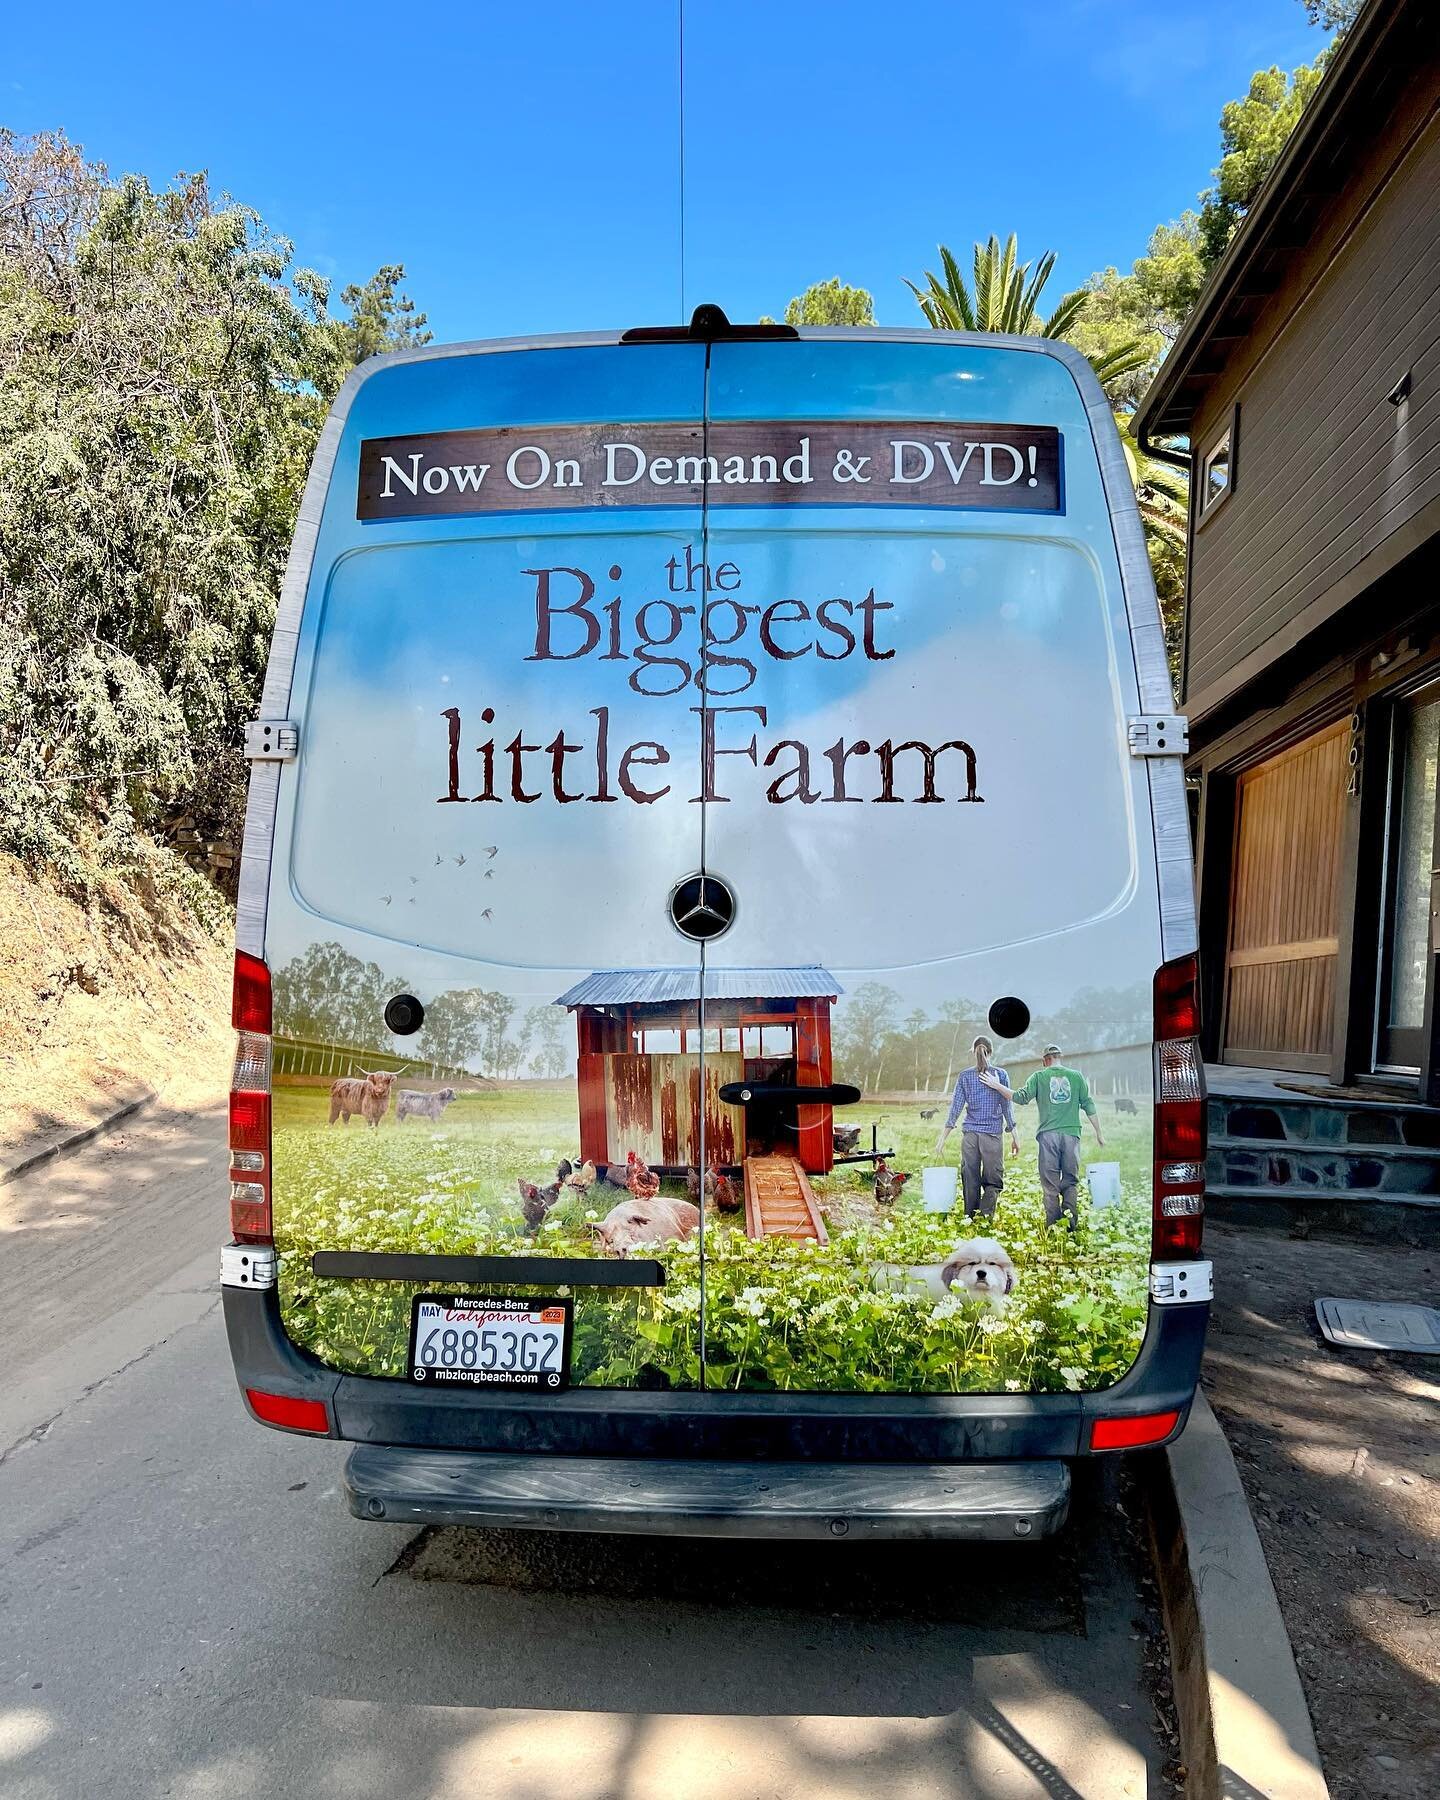 In 2020 during &ldquo;stay at home&rdquo;, I watched a beautiful, heartwarming documentary called The Biggest Little Farm @thebiggestlittlefarm. I cried my eyes out and thought, I&rsquo;d love to visit this magical place one day @apricotlanefarms&hel